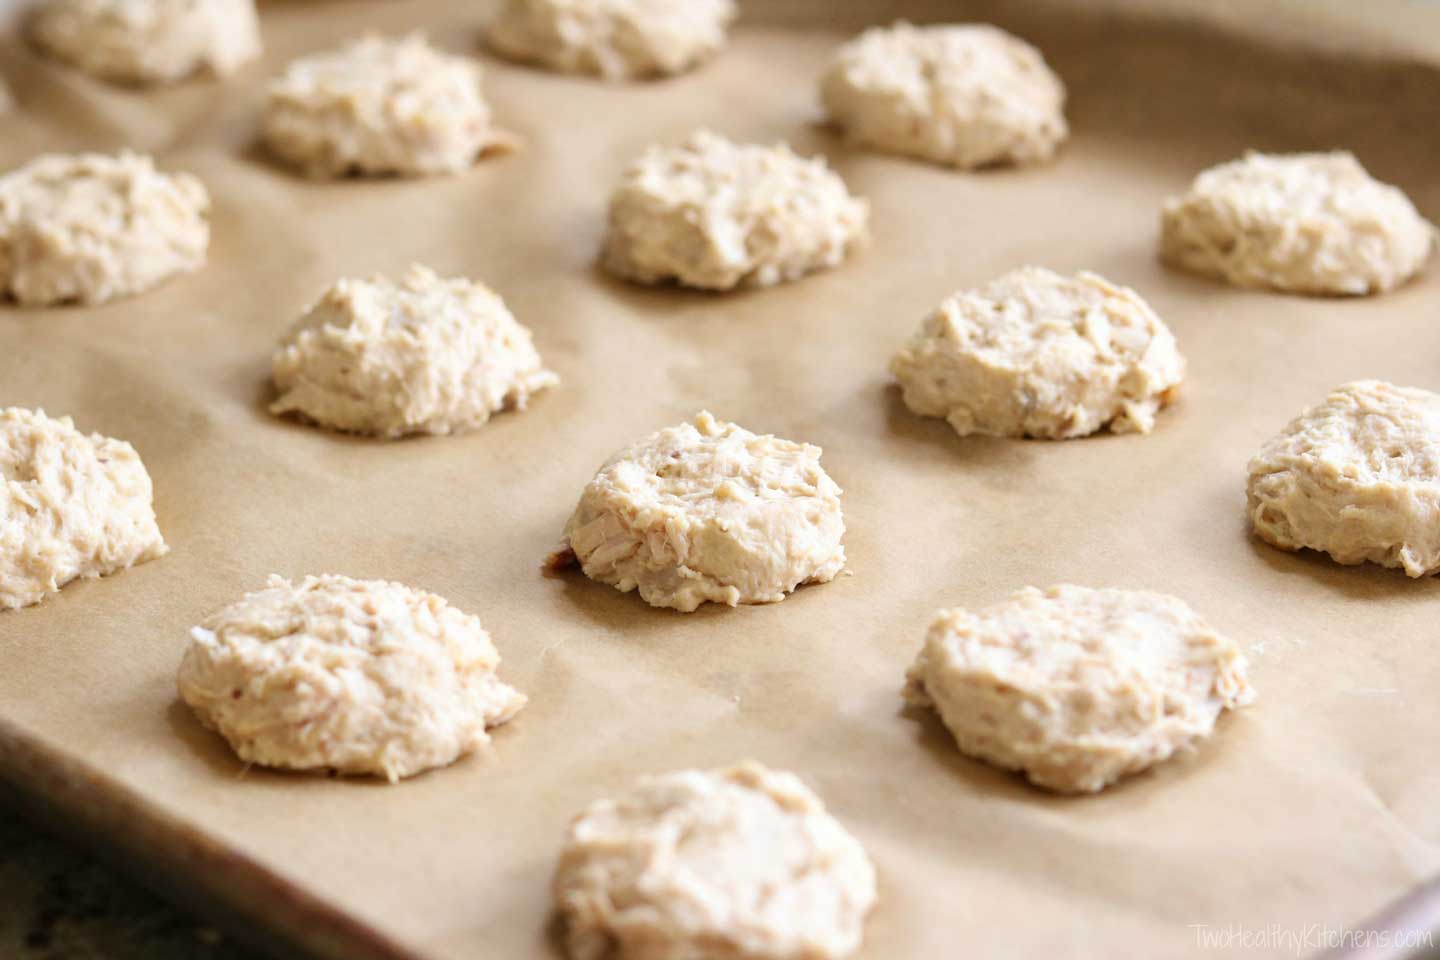 Perfect for using up leftover chicken! These easy Homemade Dog Treats are the doggy version of that classic comfort food, chicken and biscuits! Just store your leftover chicken in the freezer until you’re ready to make these healthy dog treats. And there’s no need to fuss with cookie cutters – these easy drop biscuits are so much faster! With just 4 ingredients, this dog treat recipe is ultra quick and easy, and these store beautifully in the freezer for weeks! | www.TwoHealthyKitchens.com